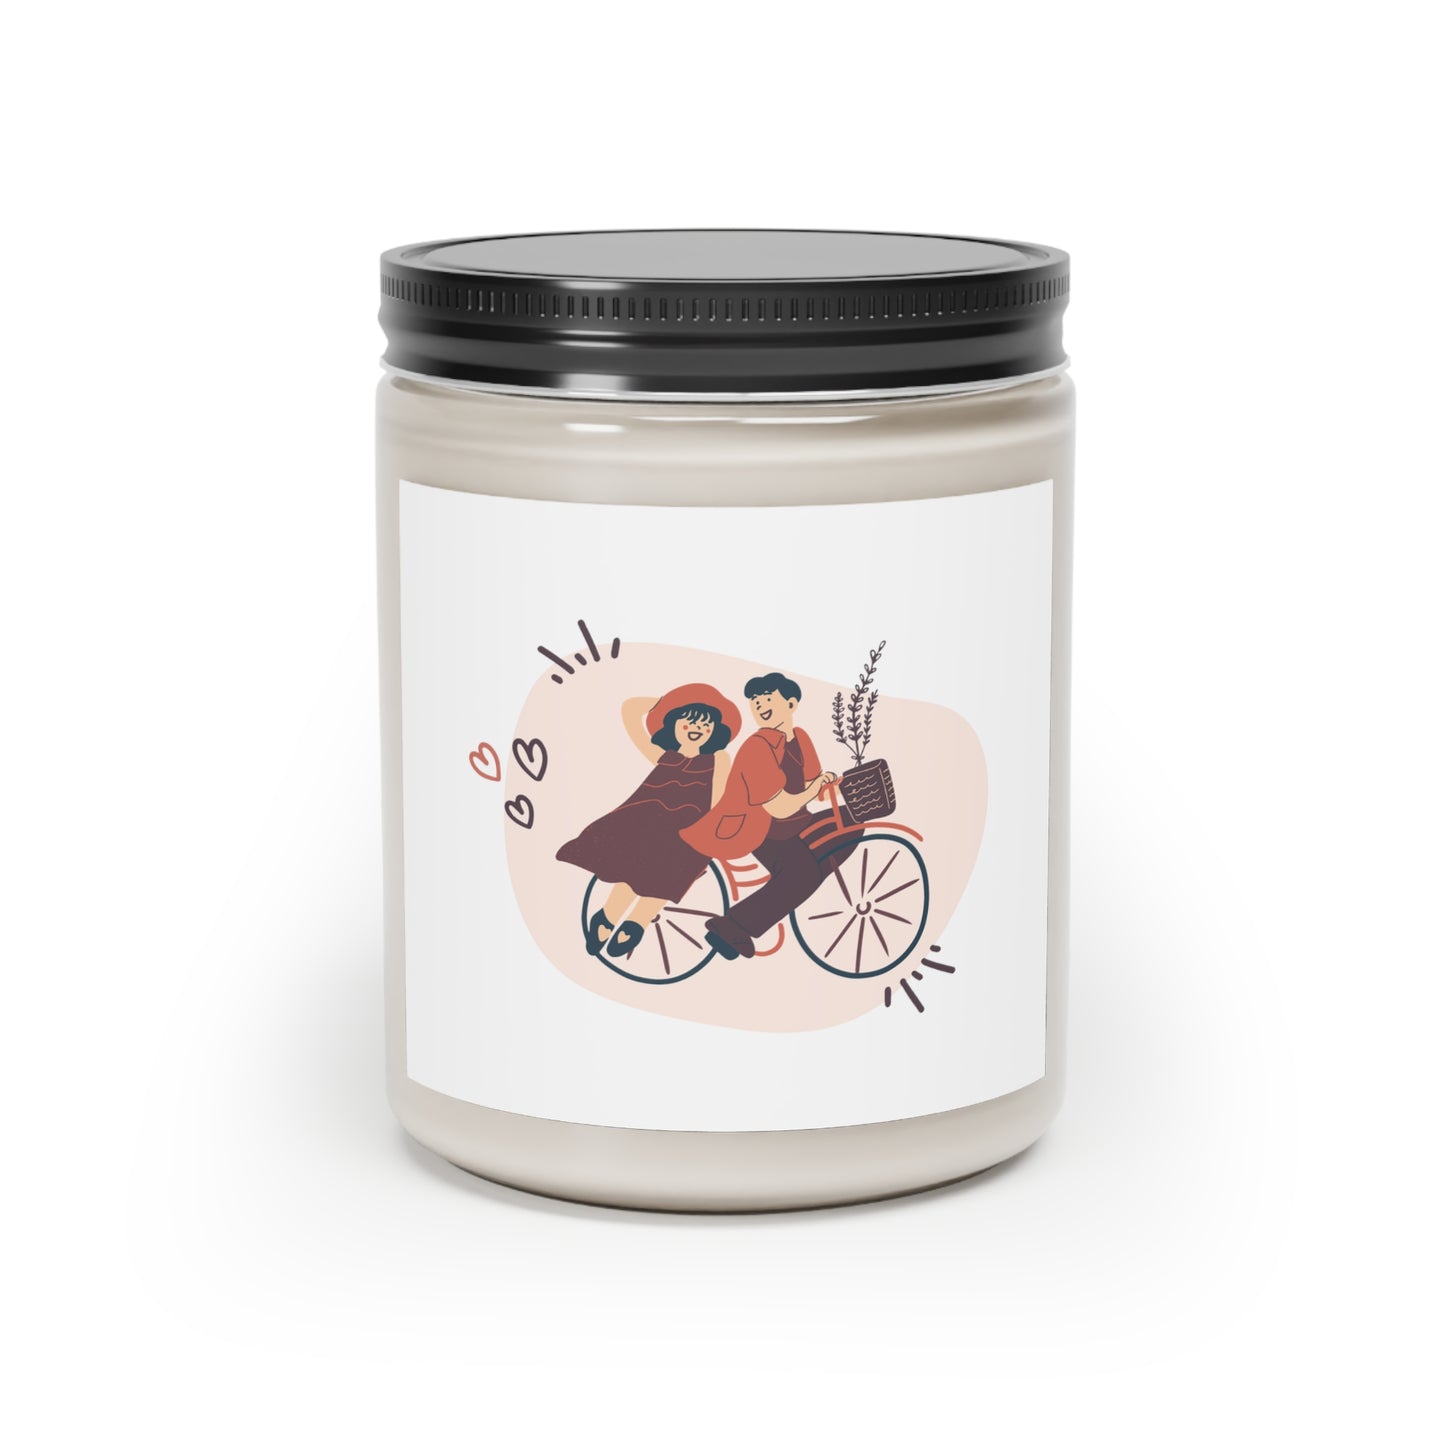 Gift for Her, Valentine's Scented Candle, Cute Couple on Bicycle Printed Scanted Candles